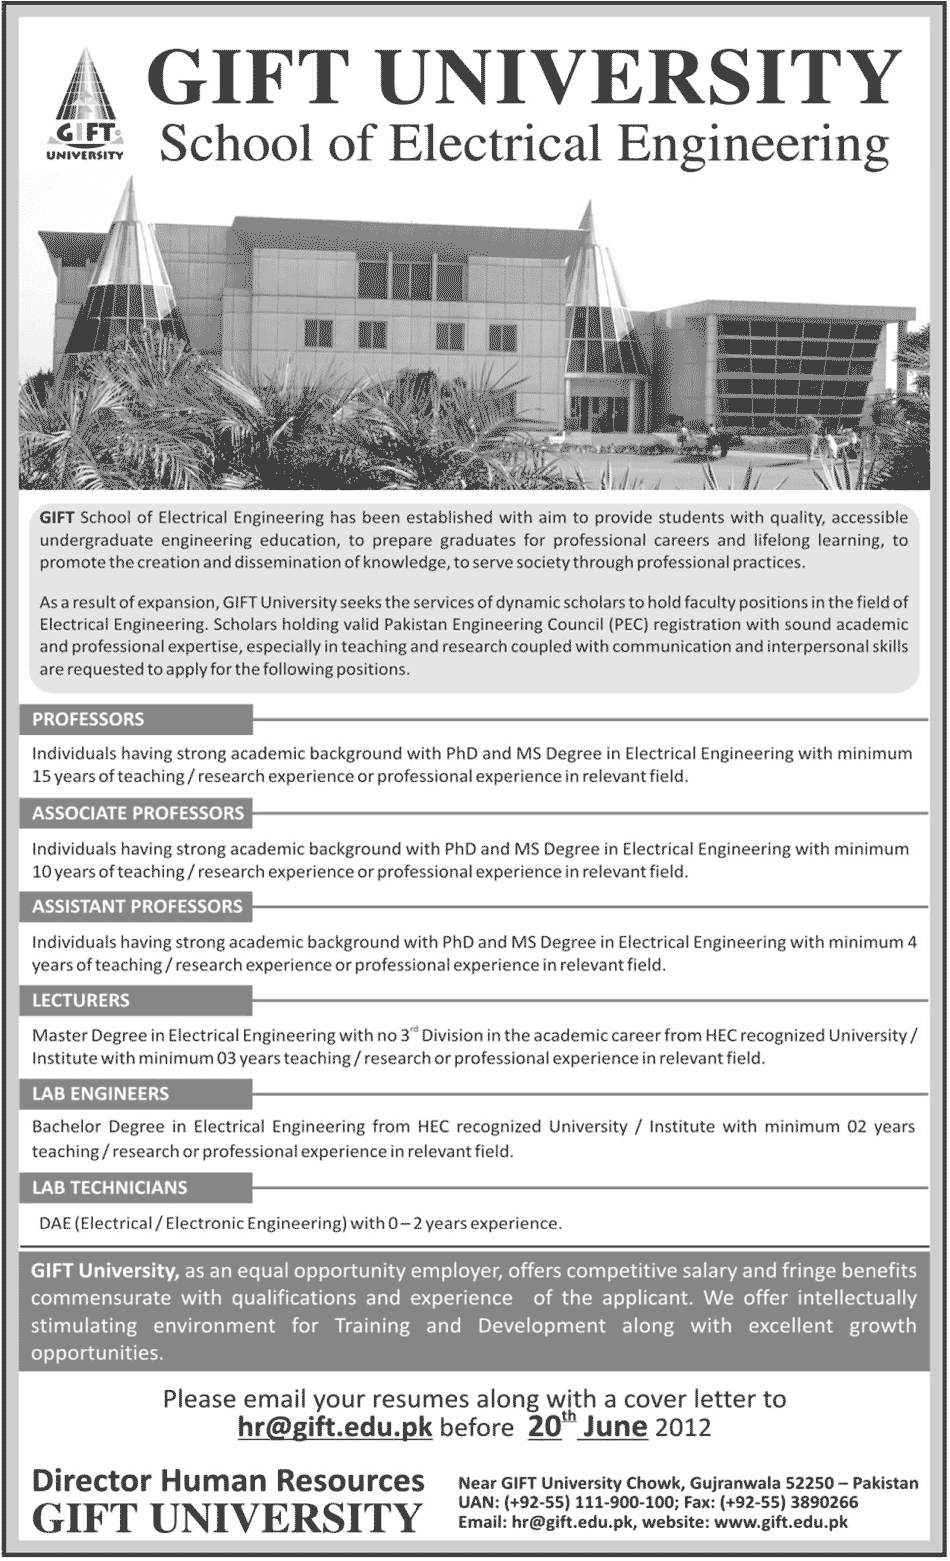 Teaching Faculty and Technicians Required at GIFT University (School of Electrical Engineering)